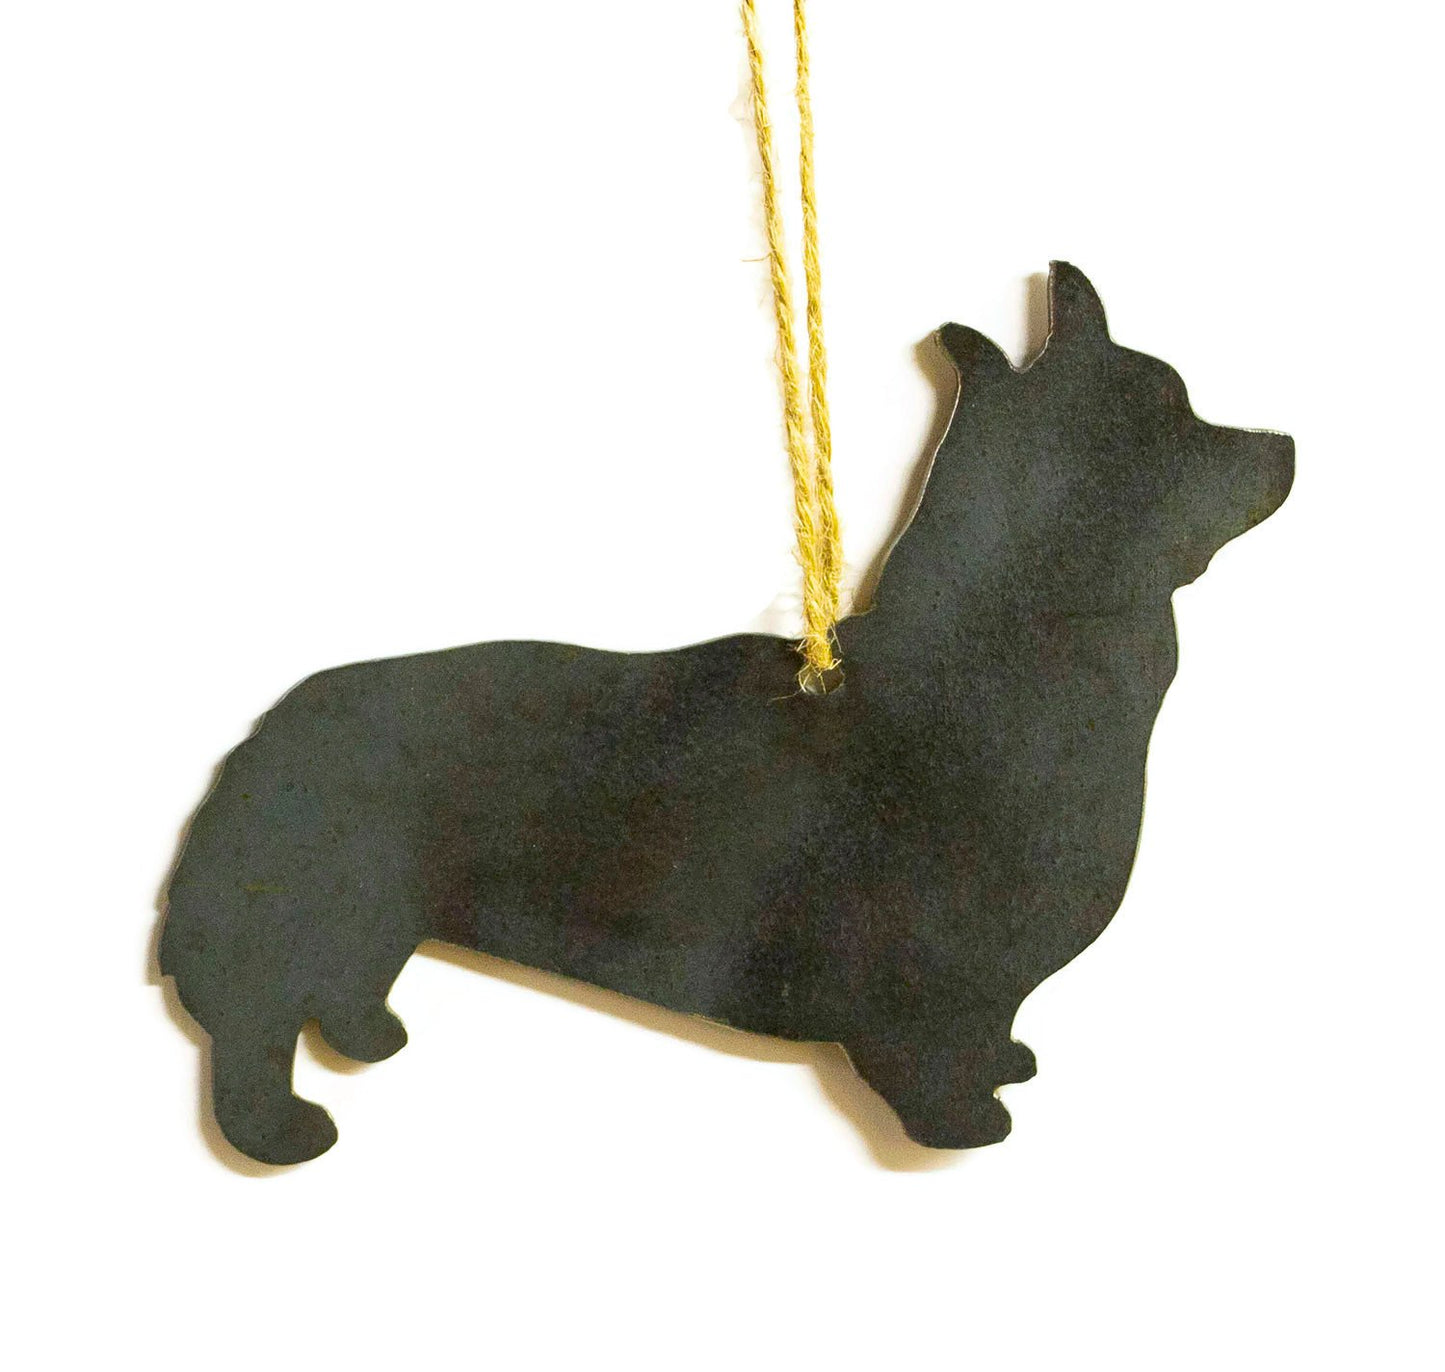 Corgi Dog Metal Christmas Ornament Tree Stocking Stuffer Party Favor Holiday Decoration Raw Steel Gift Recycled Nature Home Decor